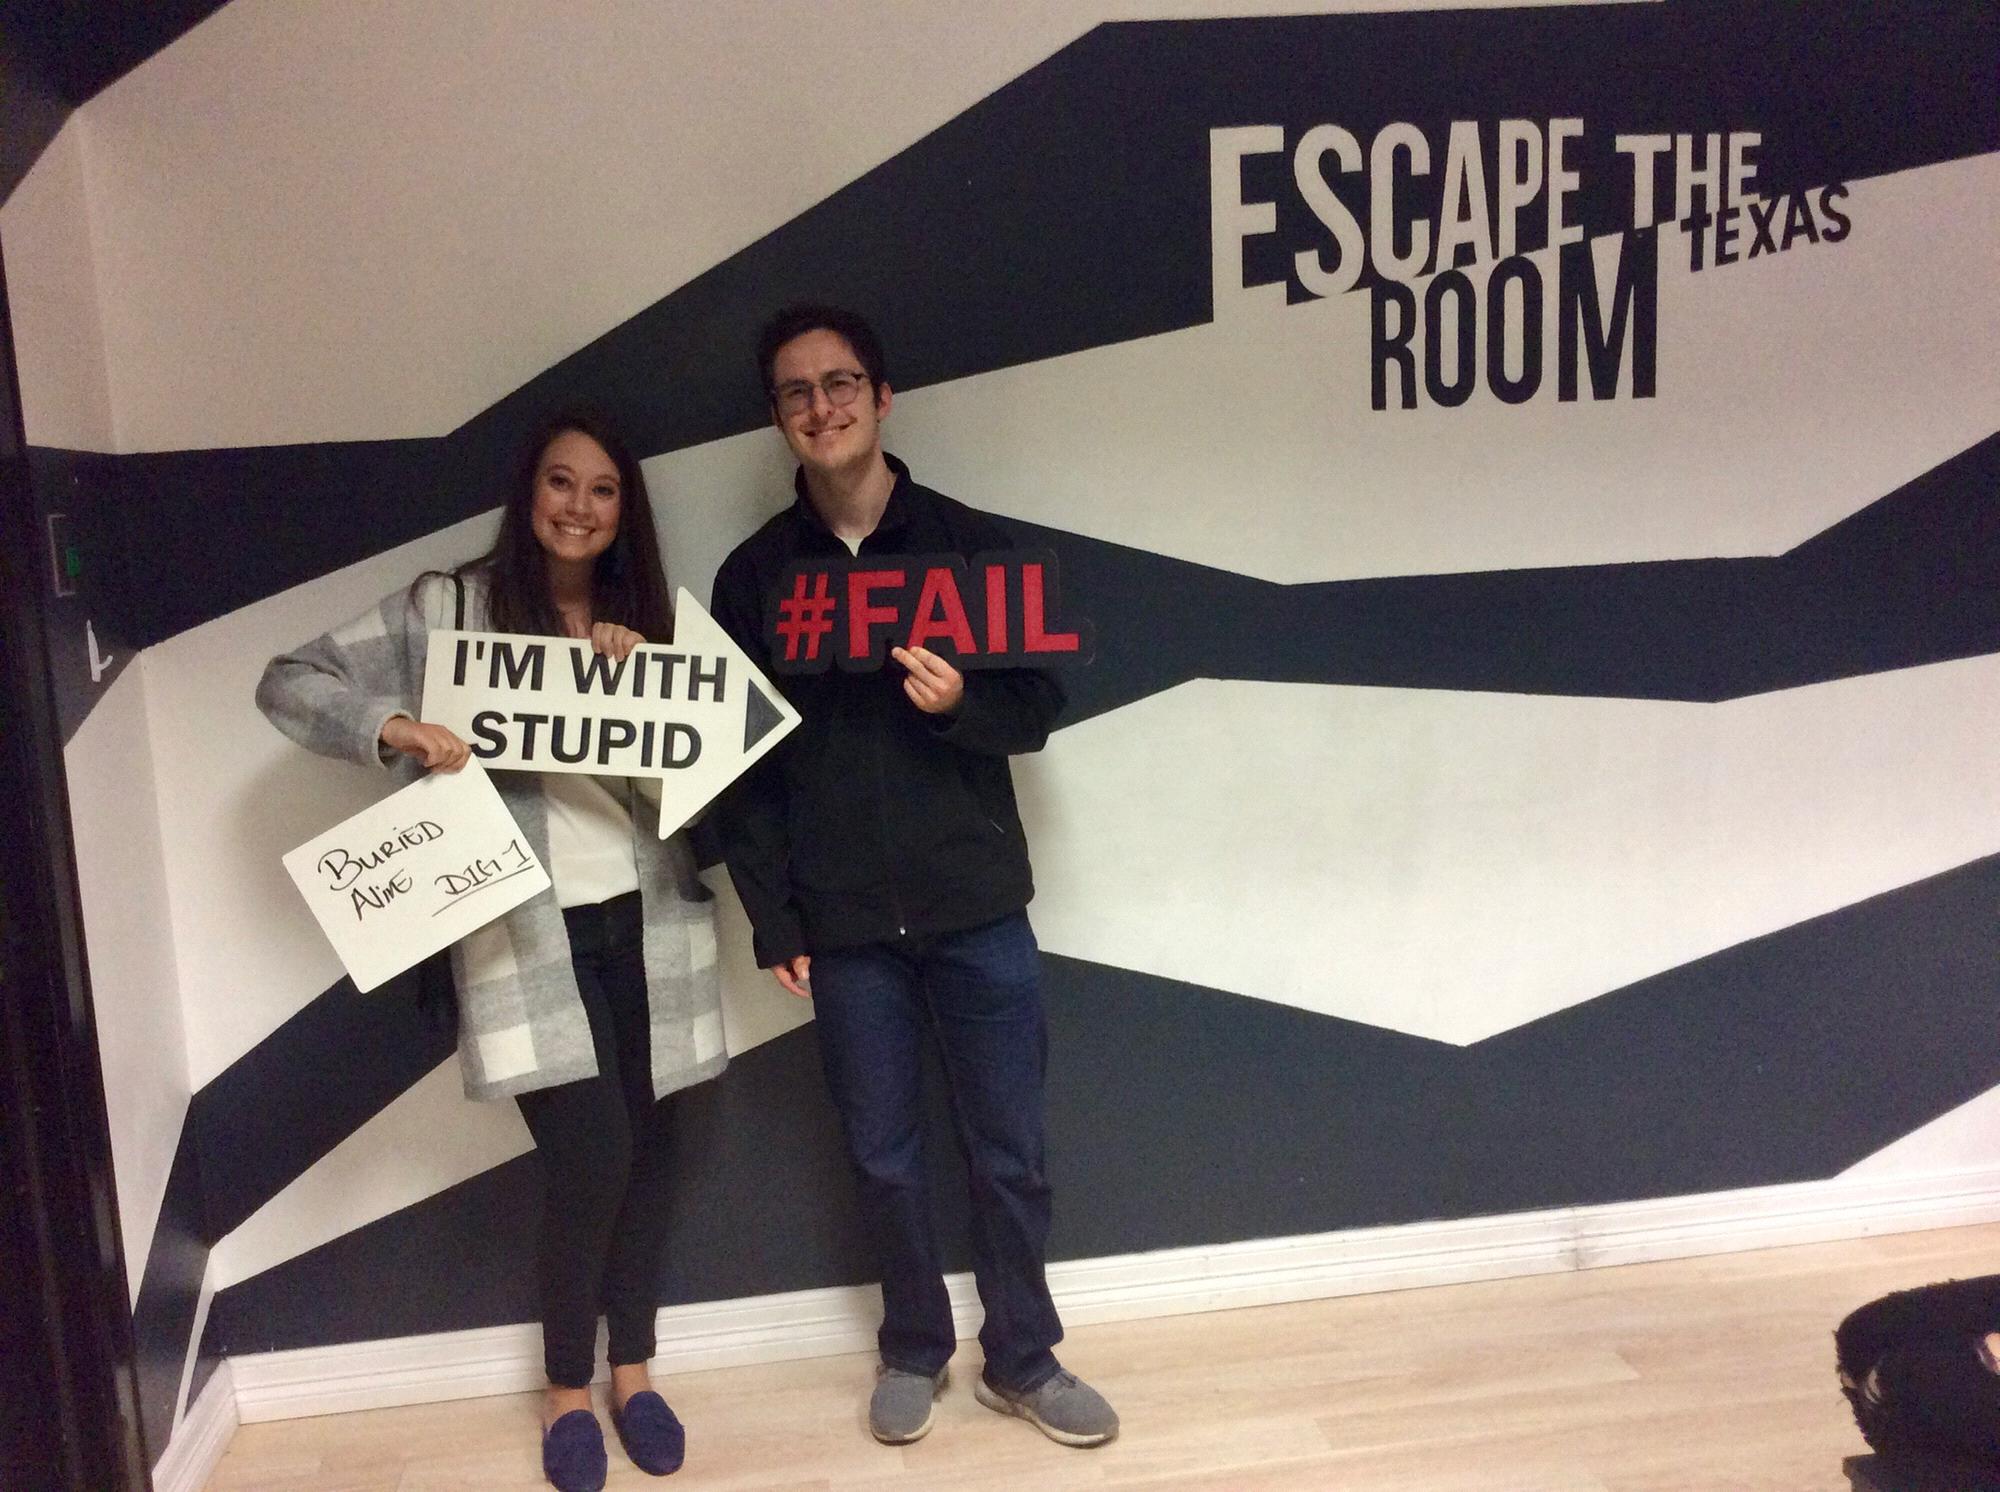 Our first photo together! We did an escape room meant for 8 with just the two of us, we failed to escape...